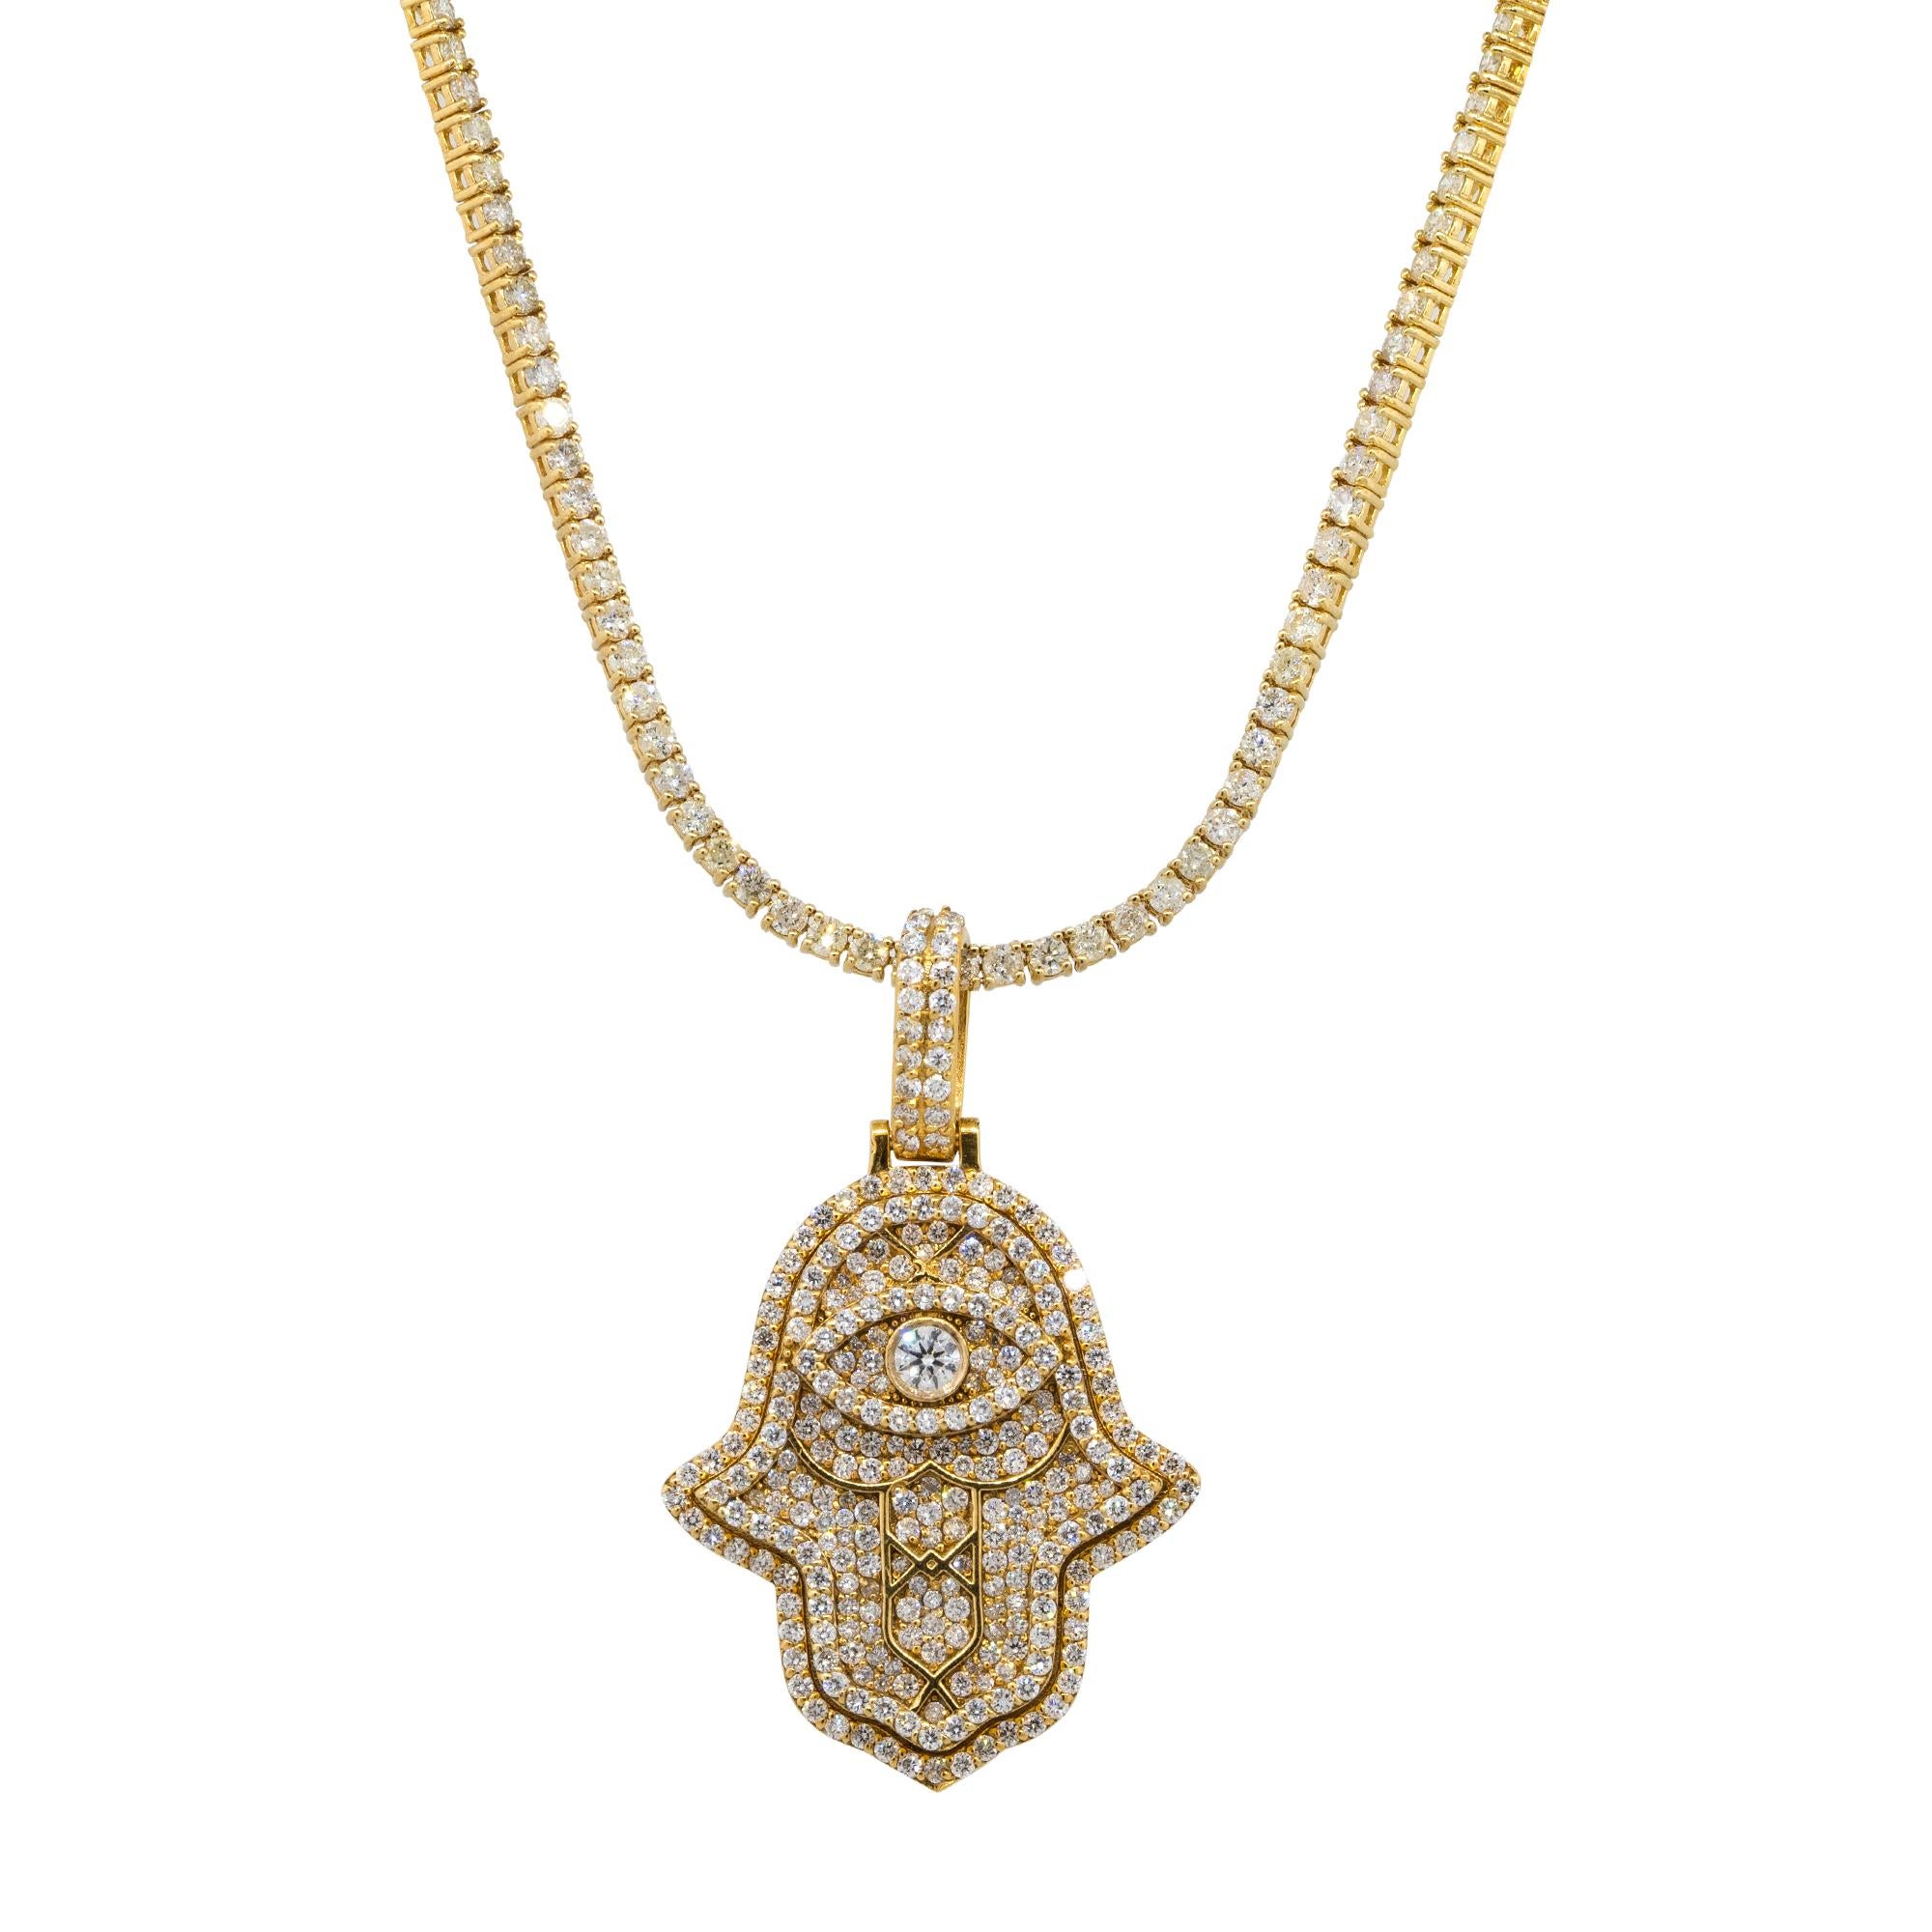 Disclaimer: This listing is for the pendant ONLY
Material: 14k Yellow Gold
Diamond Details: Approx. 2.67ctw of round cut Diamonds. Diamonds are G/H in color and SI/VS in clarity, 281 stones.  
Pendant Measurements: 28mm x 9.20mm x 46.50mm
Total